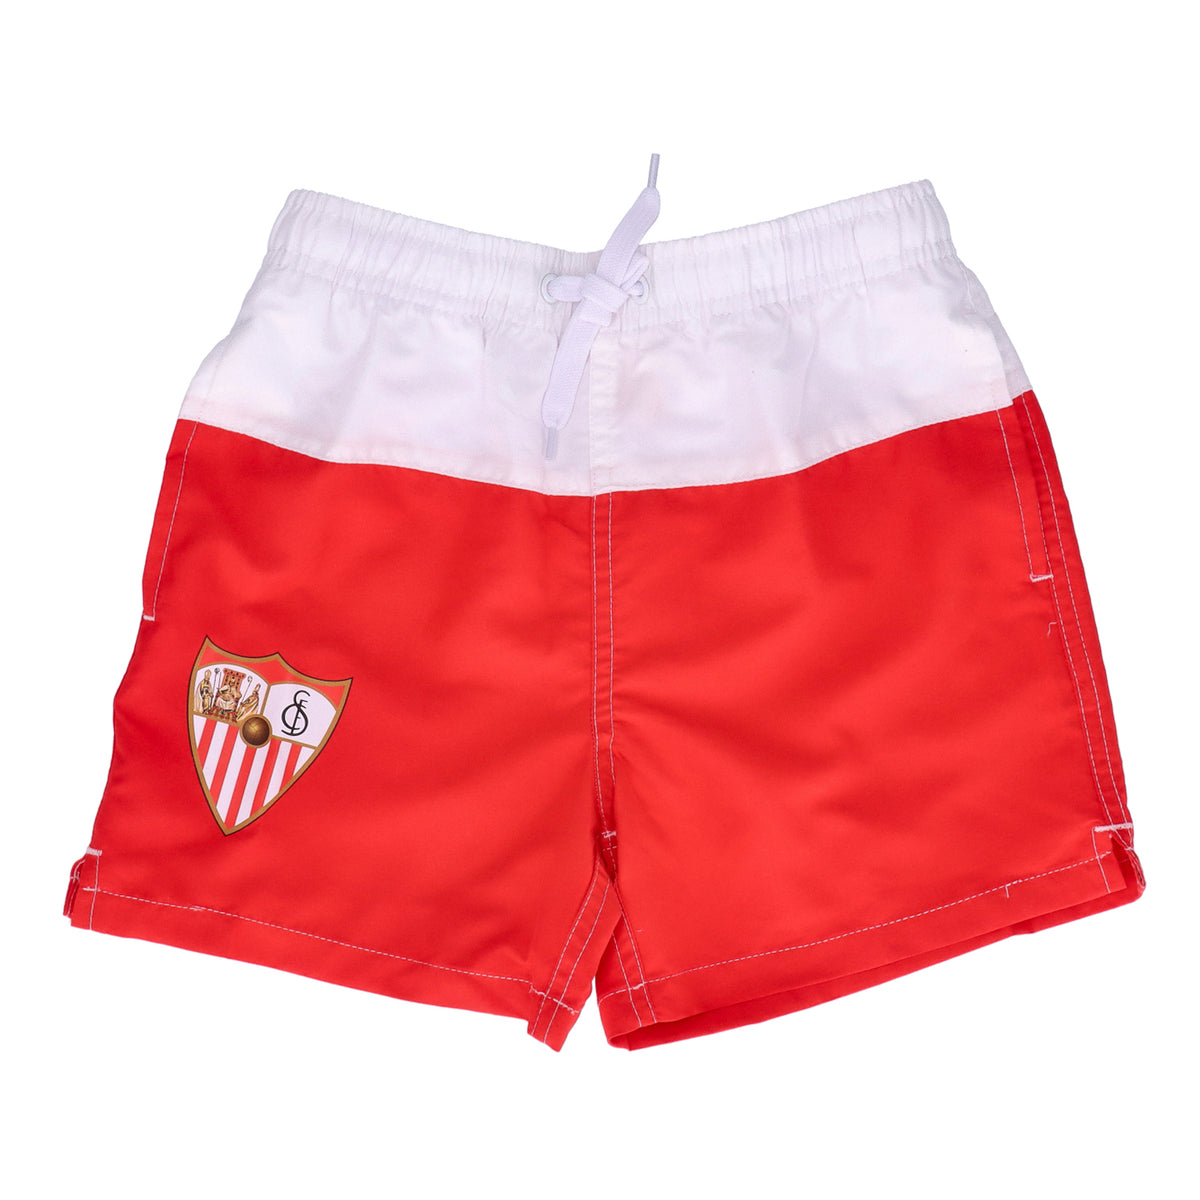 Men’s white and red swimming shorts